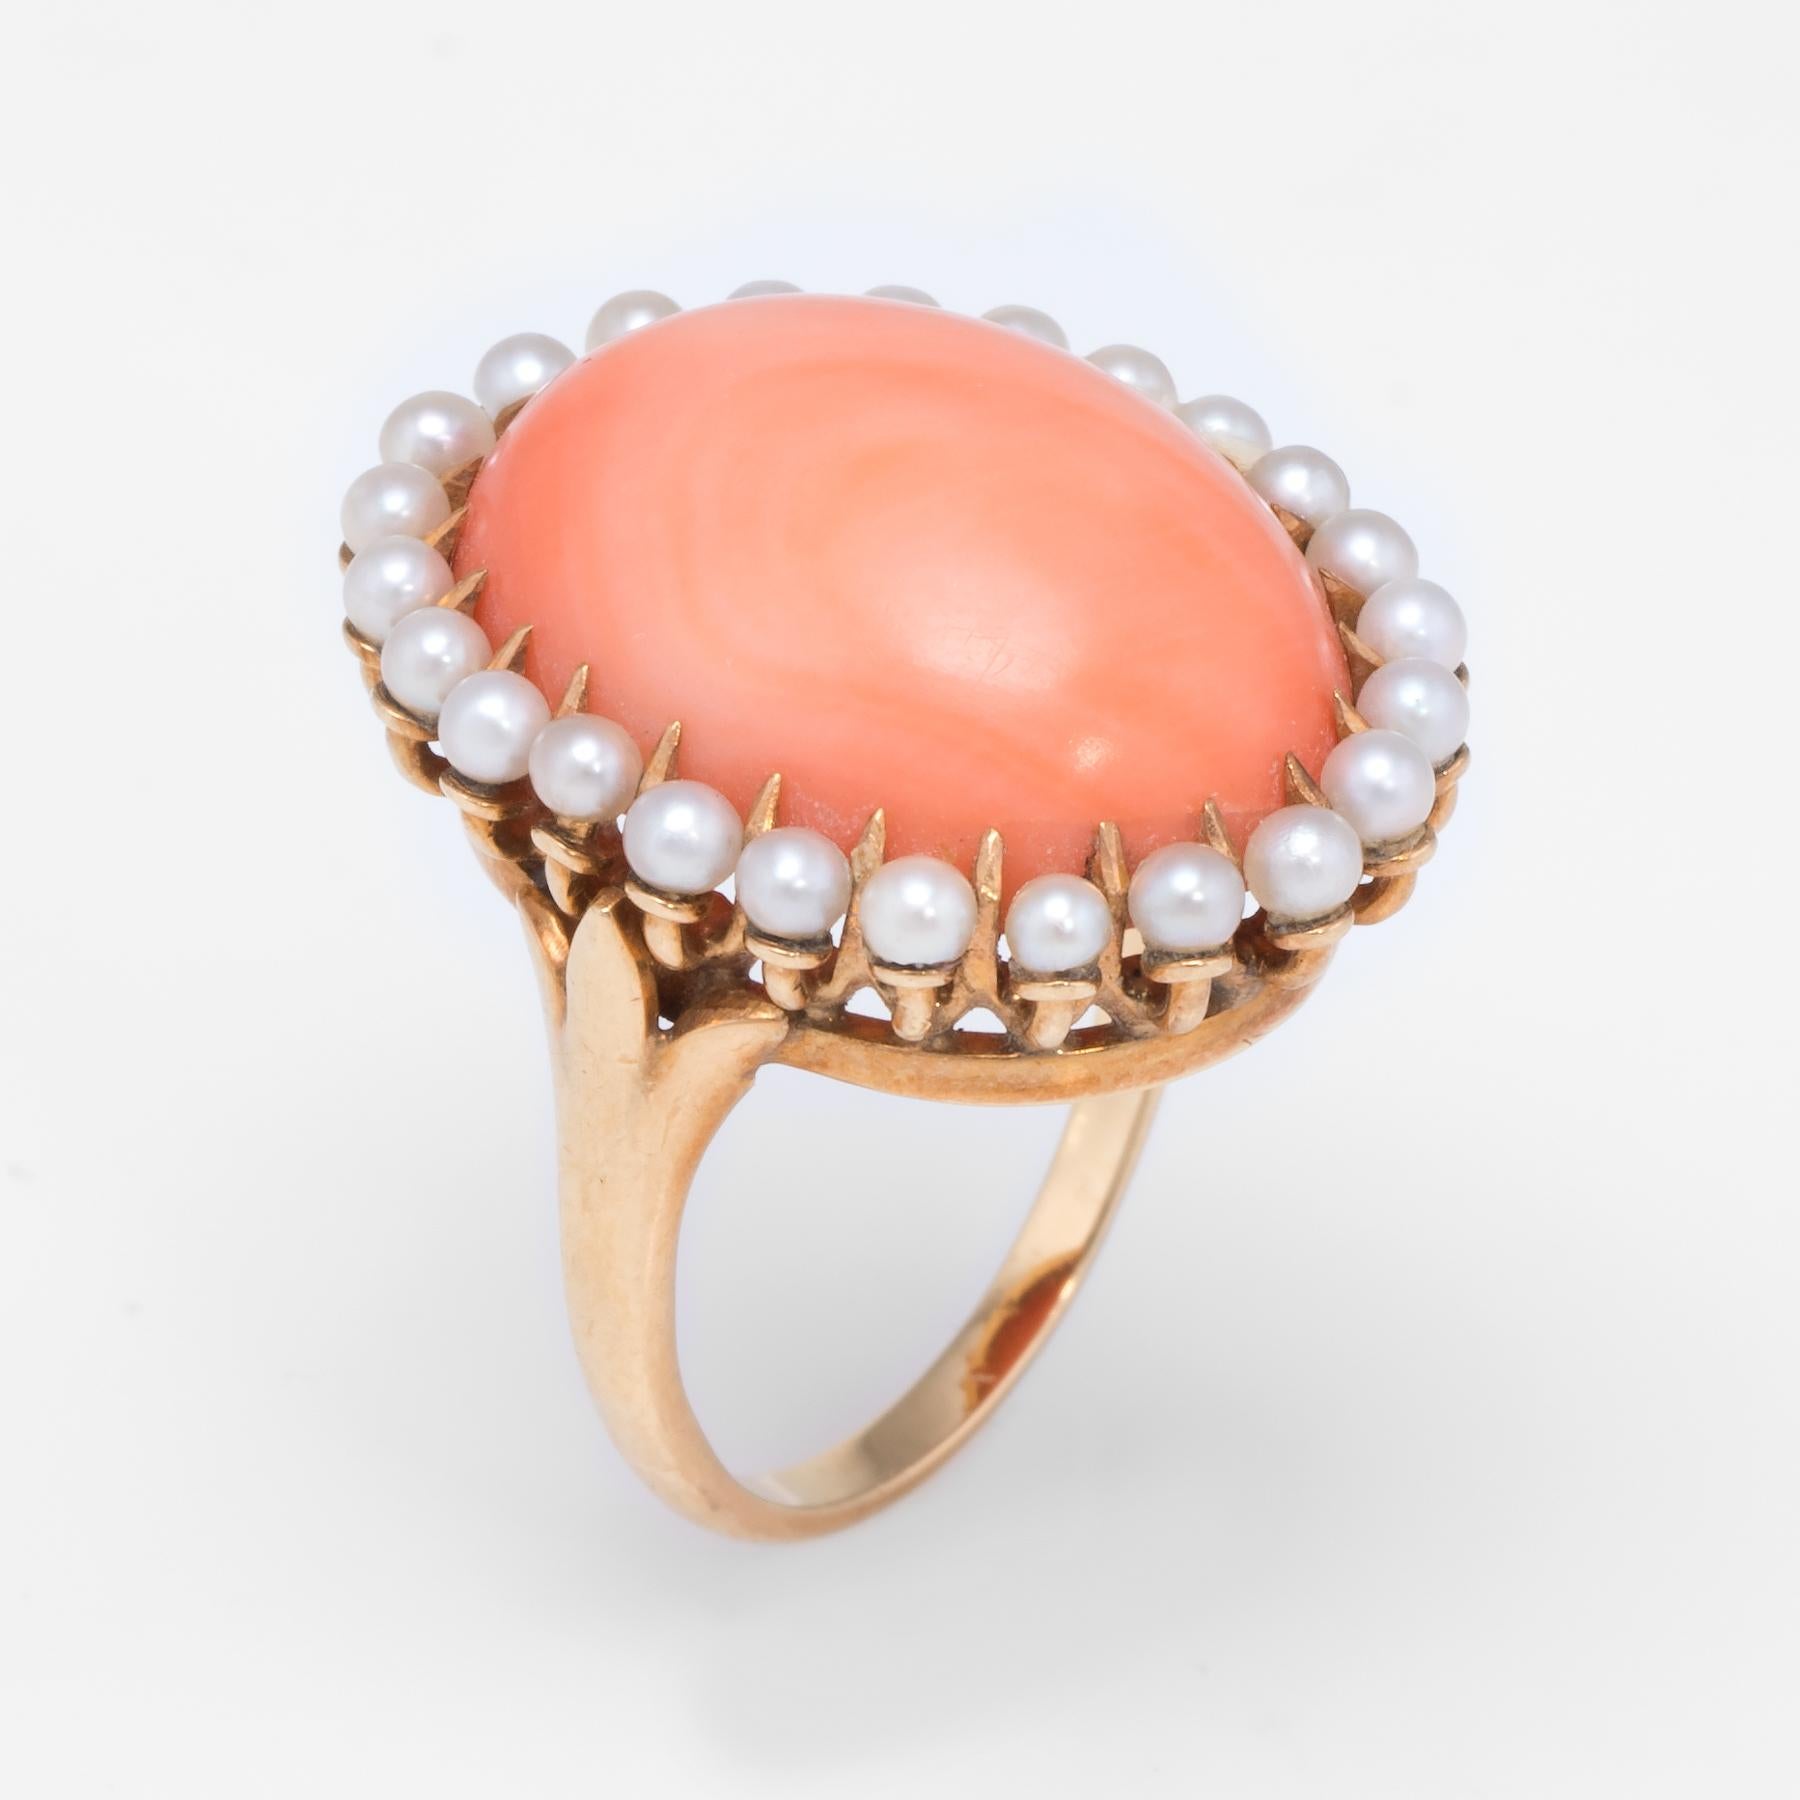 Elegant vintage cocktail ring (circa 1940s to 1950s), crafted in 14 karat yellow gold. 

Centrally mounted cabochon cut coral measures 18mm x 13mm (estimated at 8 carats), accented with 1.5mm seed pearls. The coral is in excellent condition and free